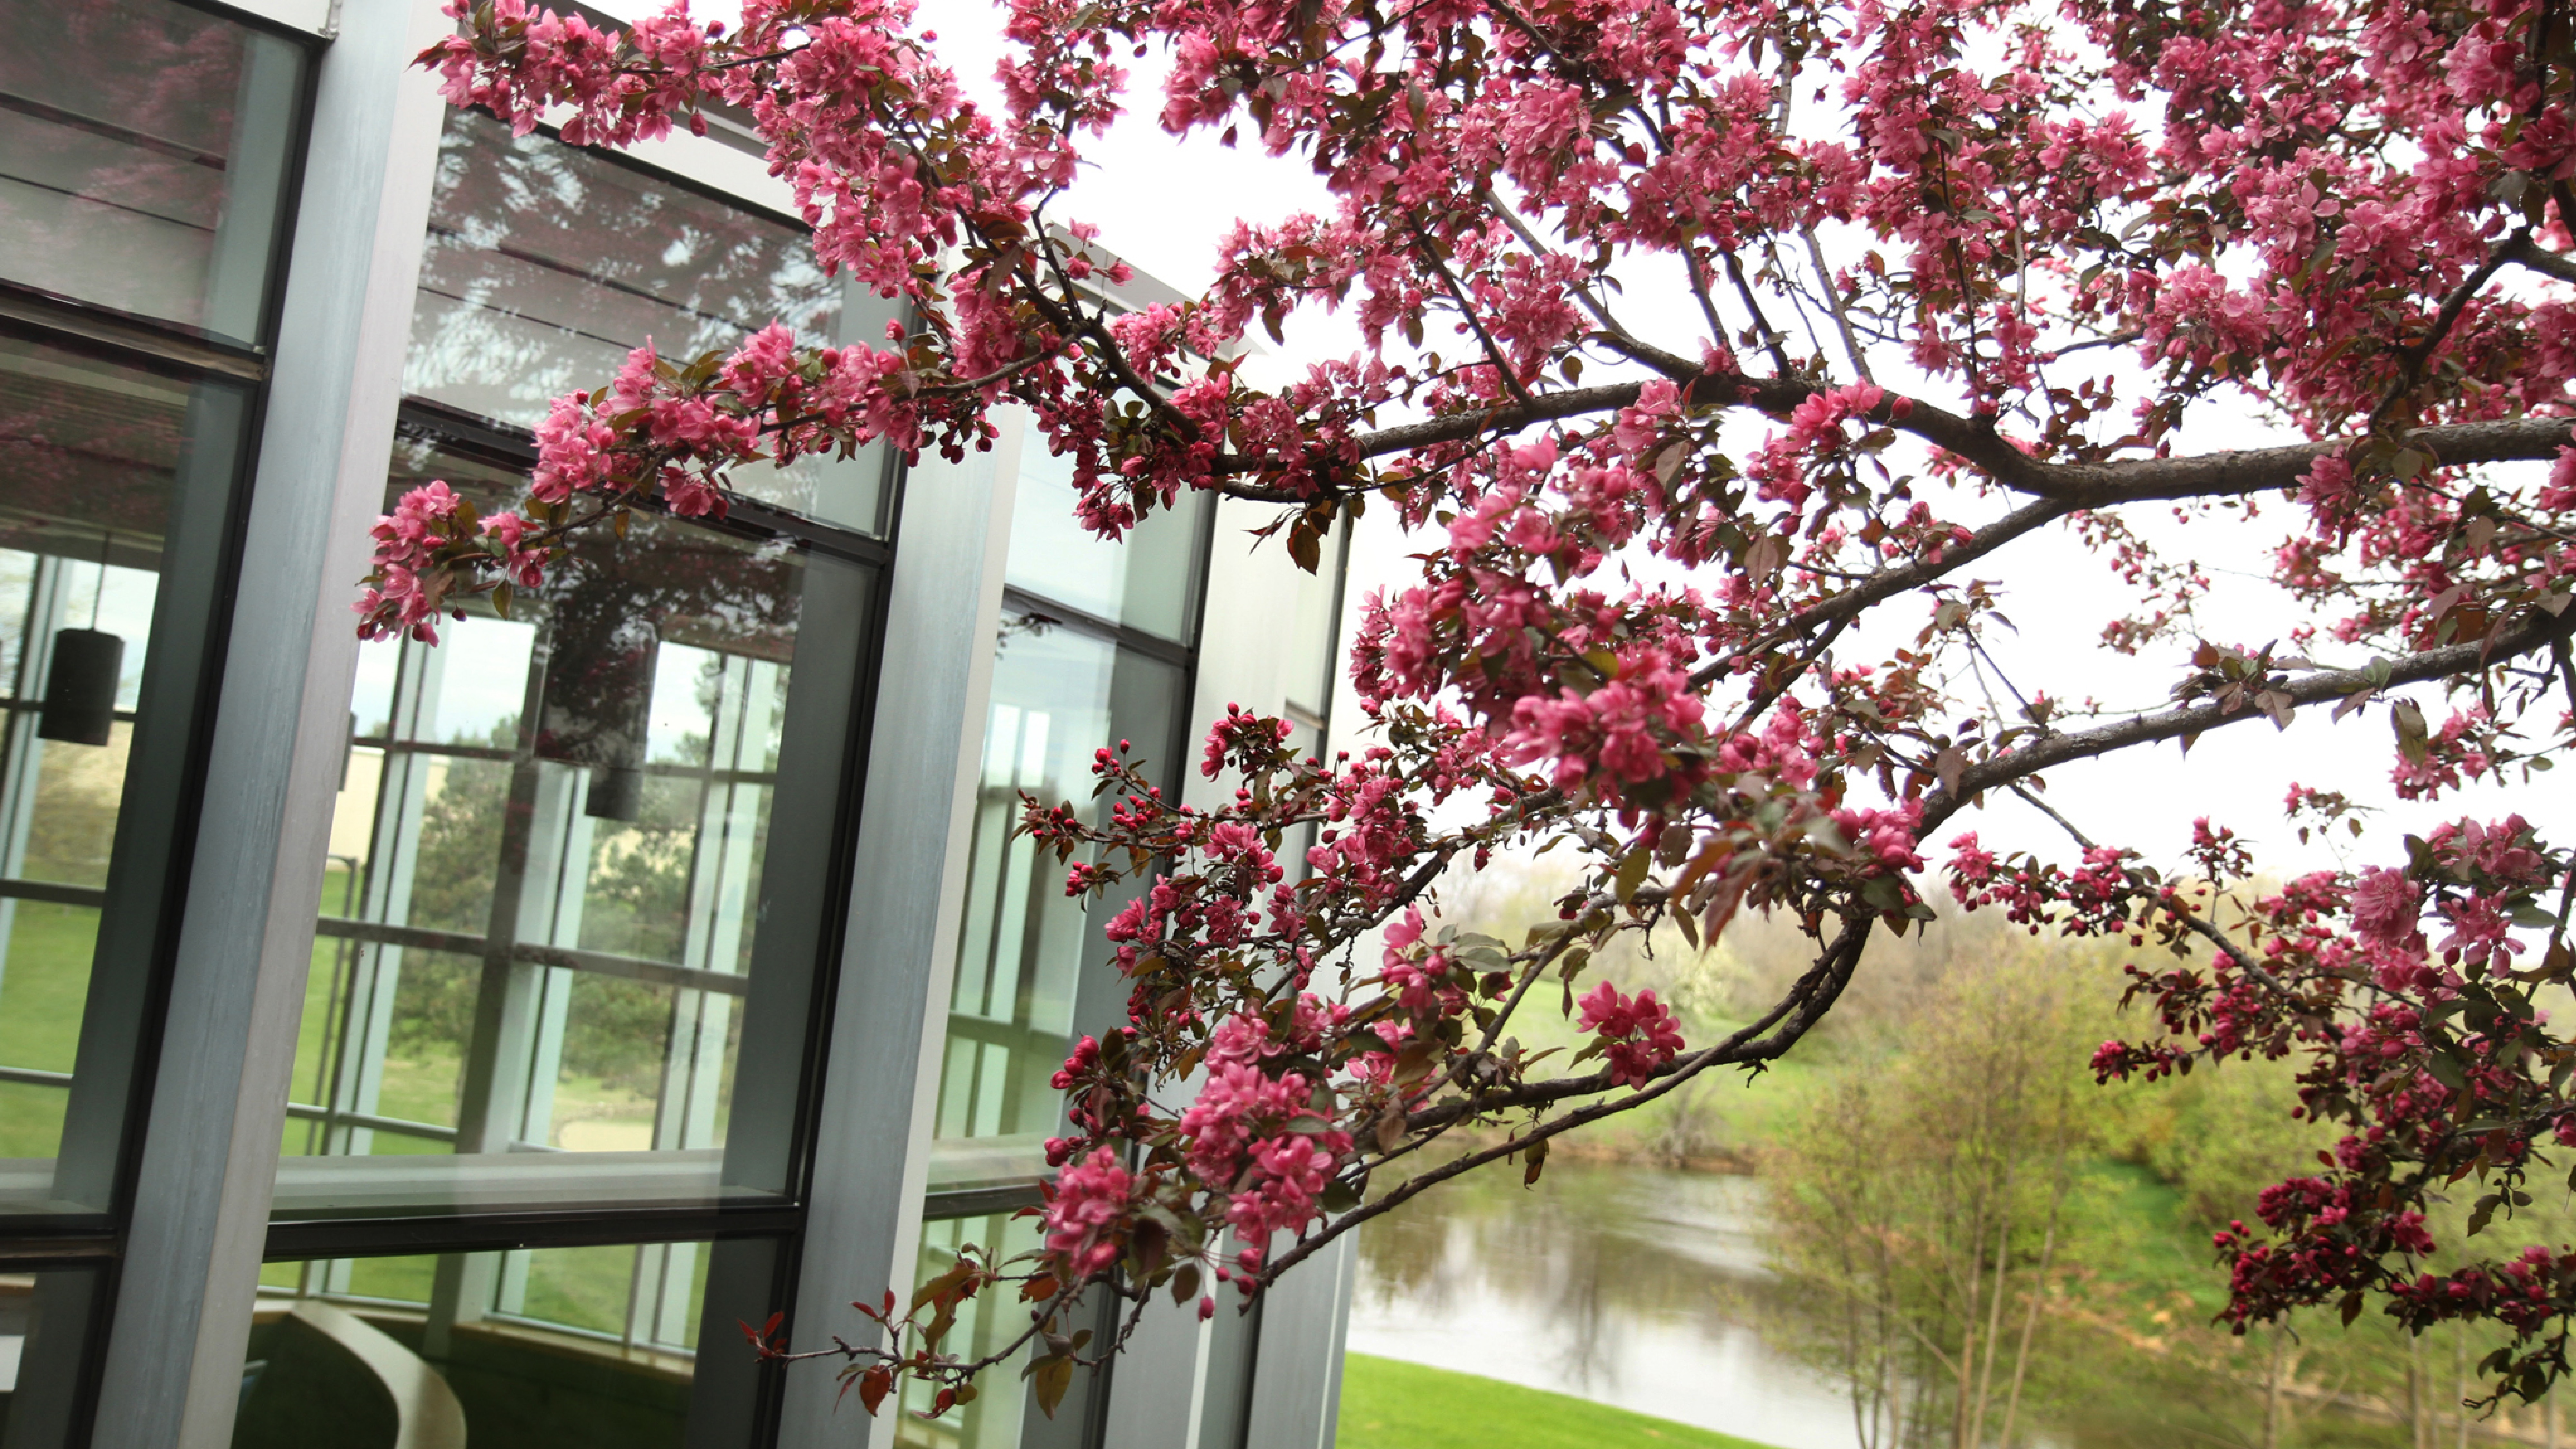 a red bud tree blooming in from of some glass windows.